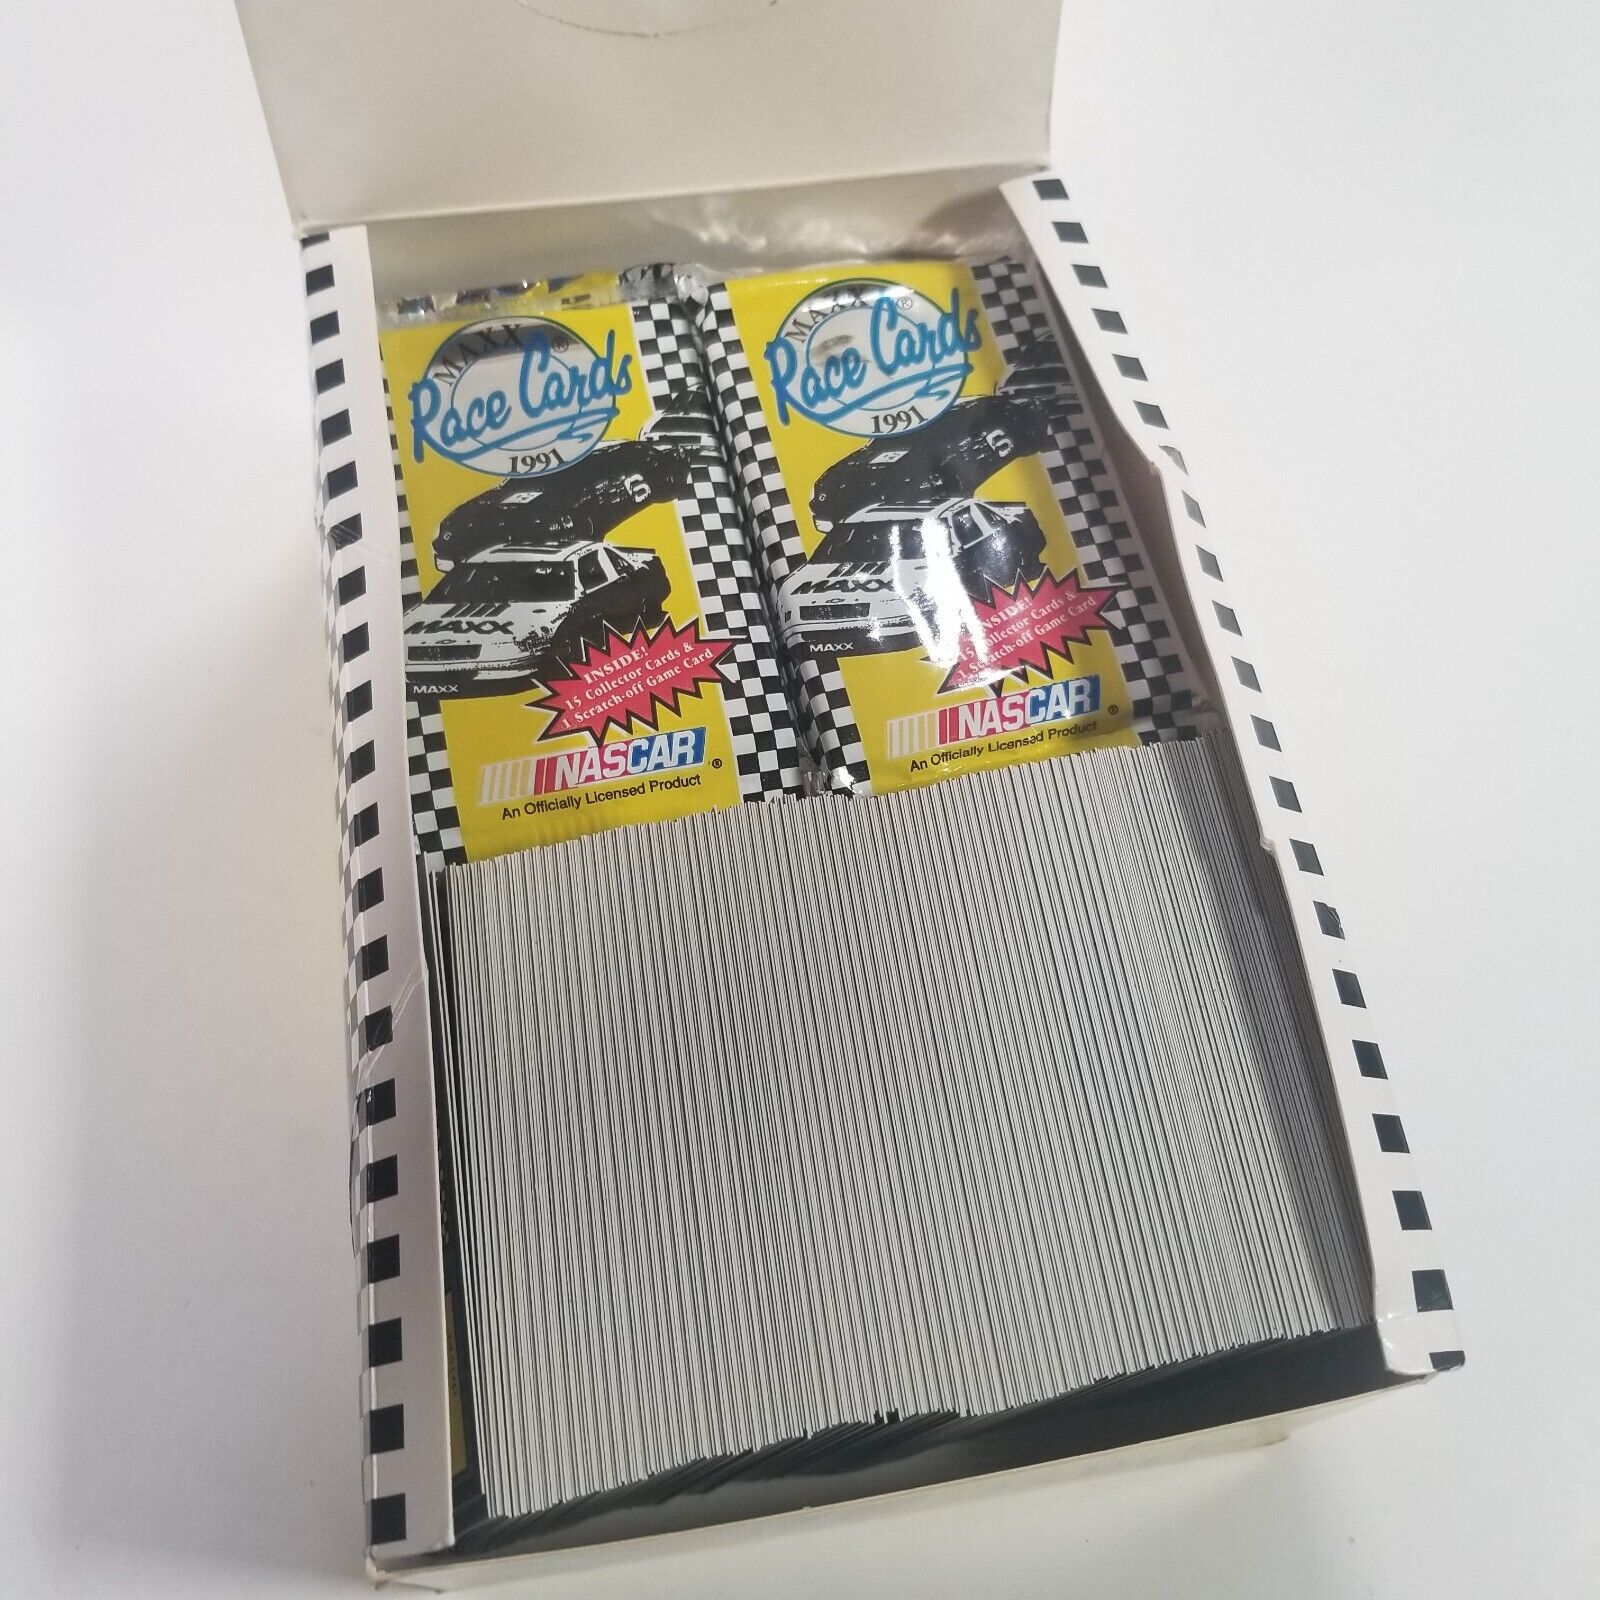 Collector Cards MAXX Race Big Lot 1991 Nascar  Opened and Unopened Packs